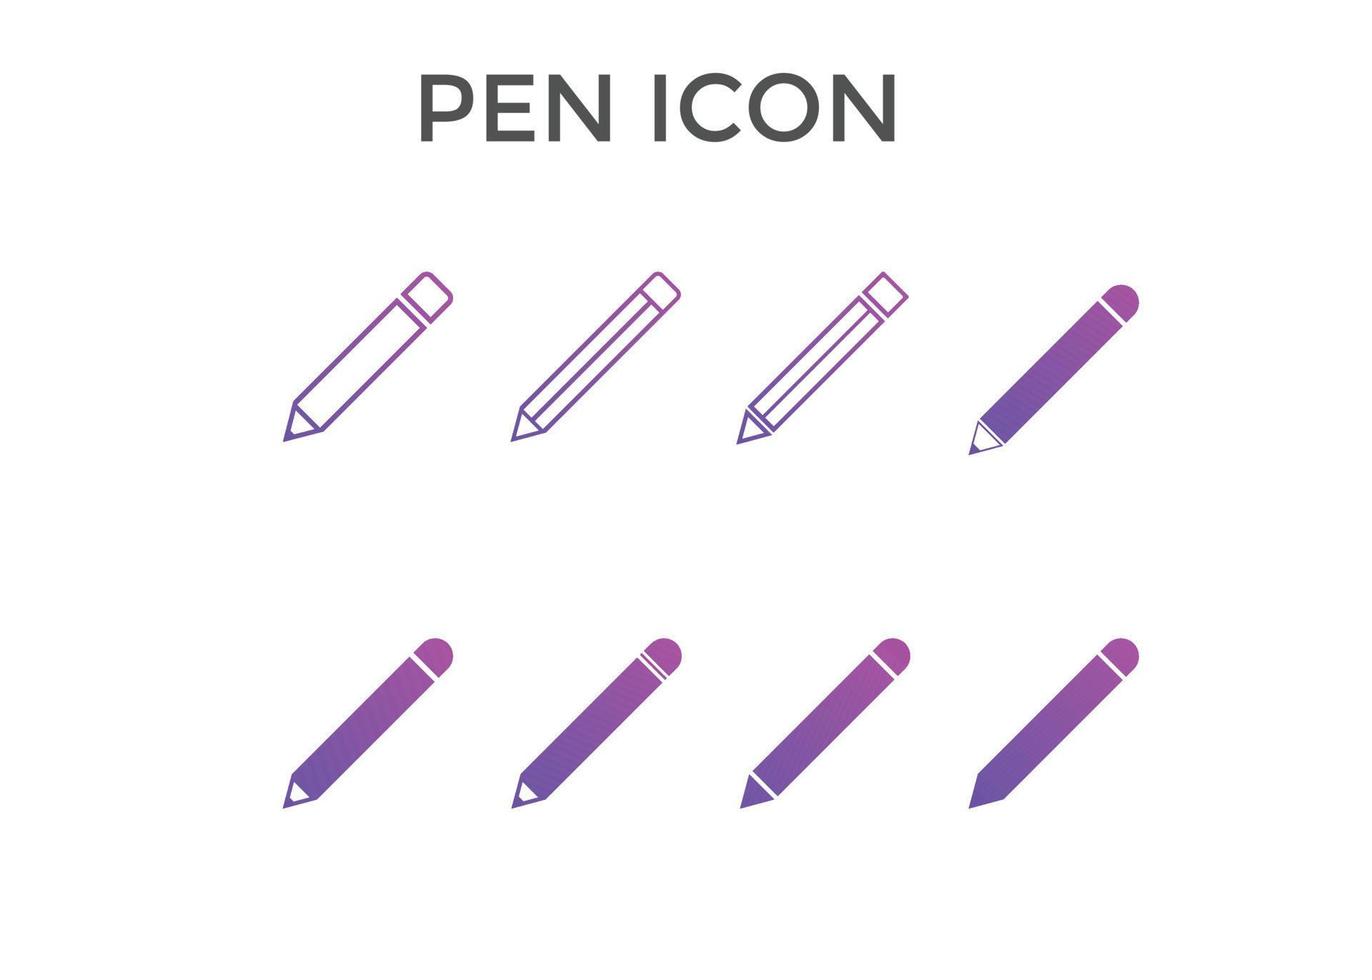 Set of Pen, pencil icons. Drawing tools icon set vector